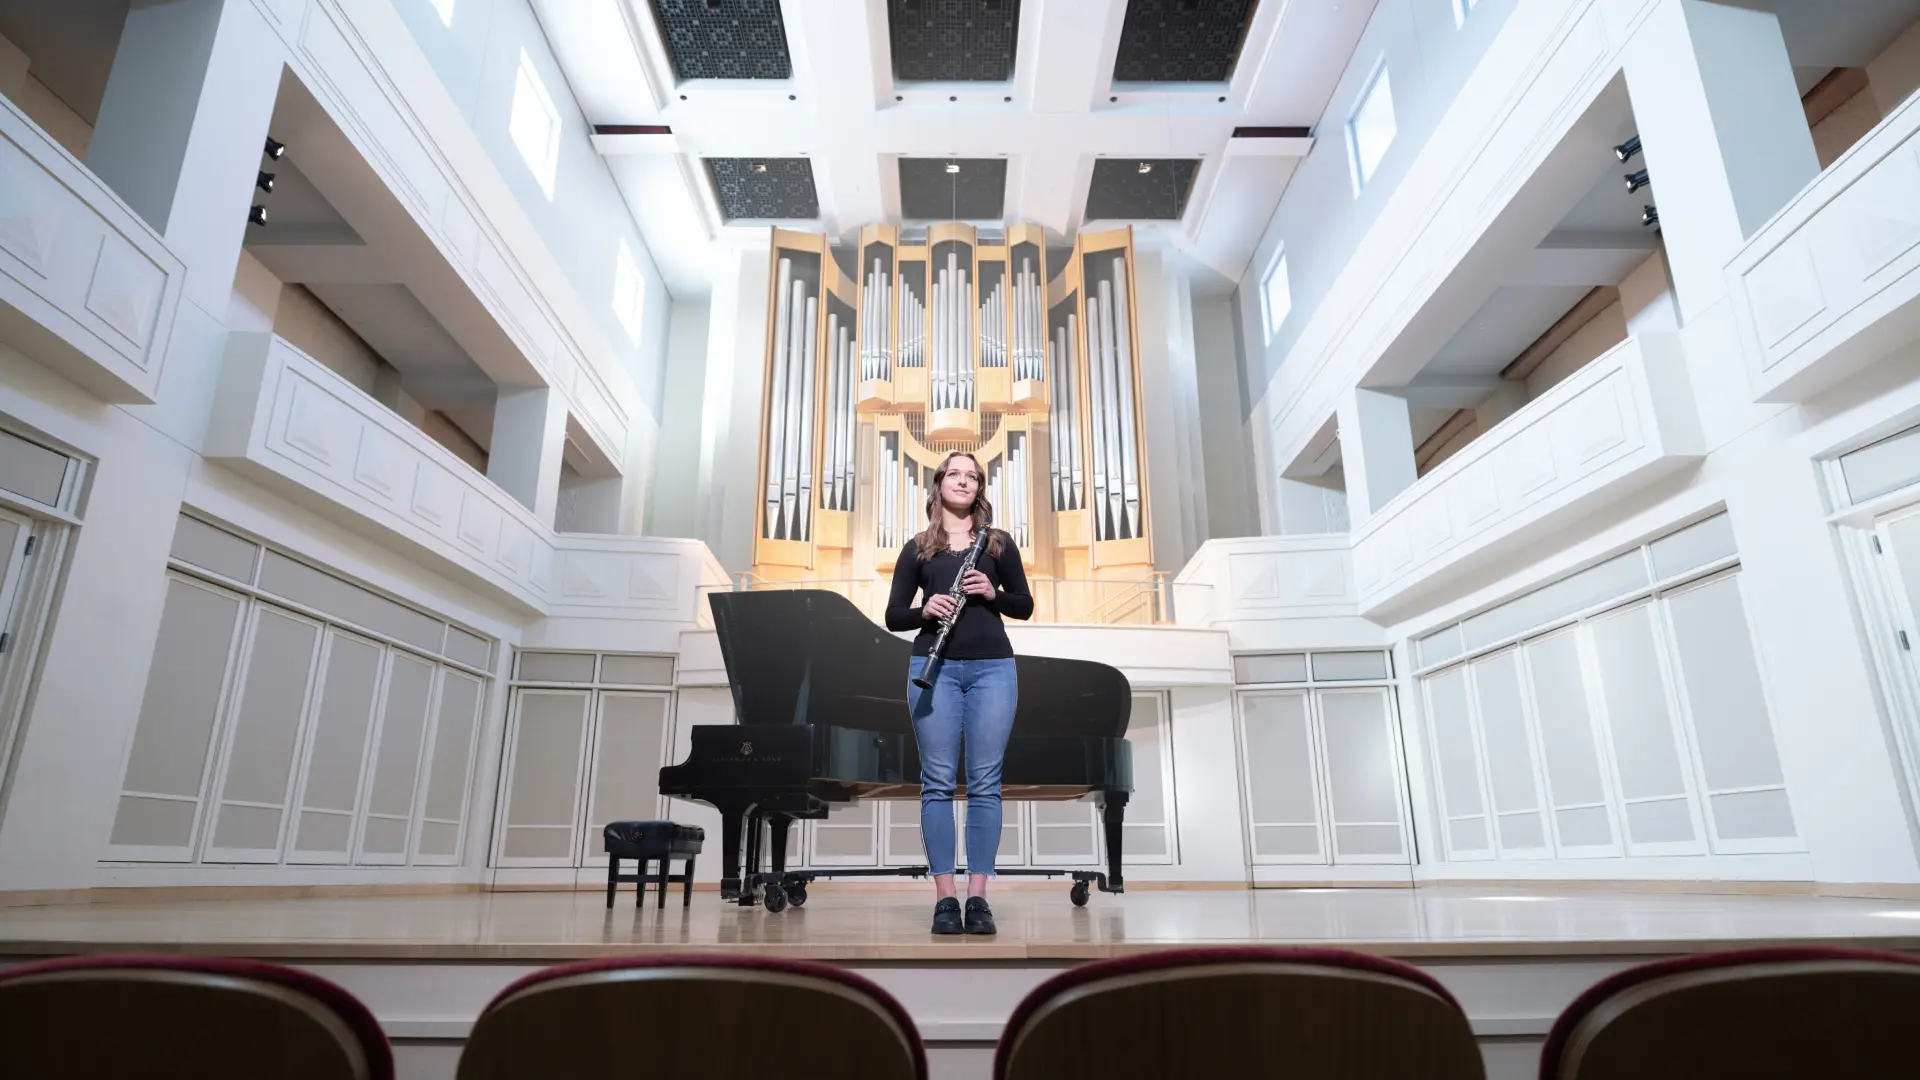 A female student stands centerstage holding her instrument, she looks out across the performance hall in front of her.